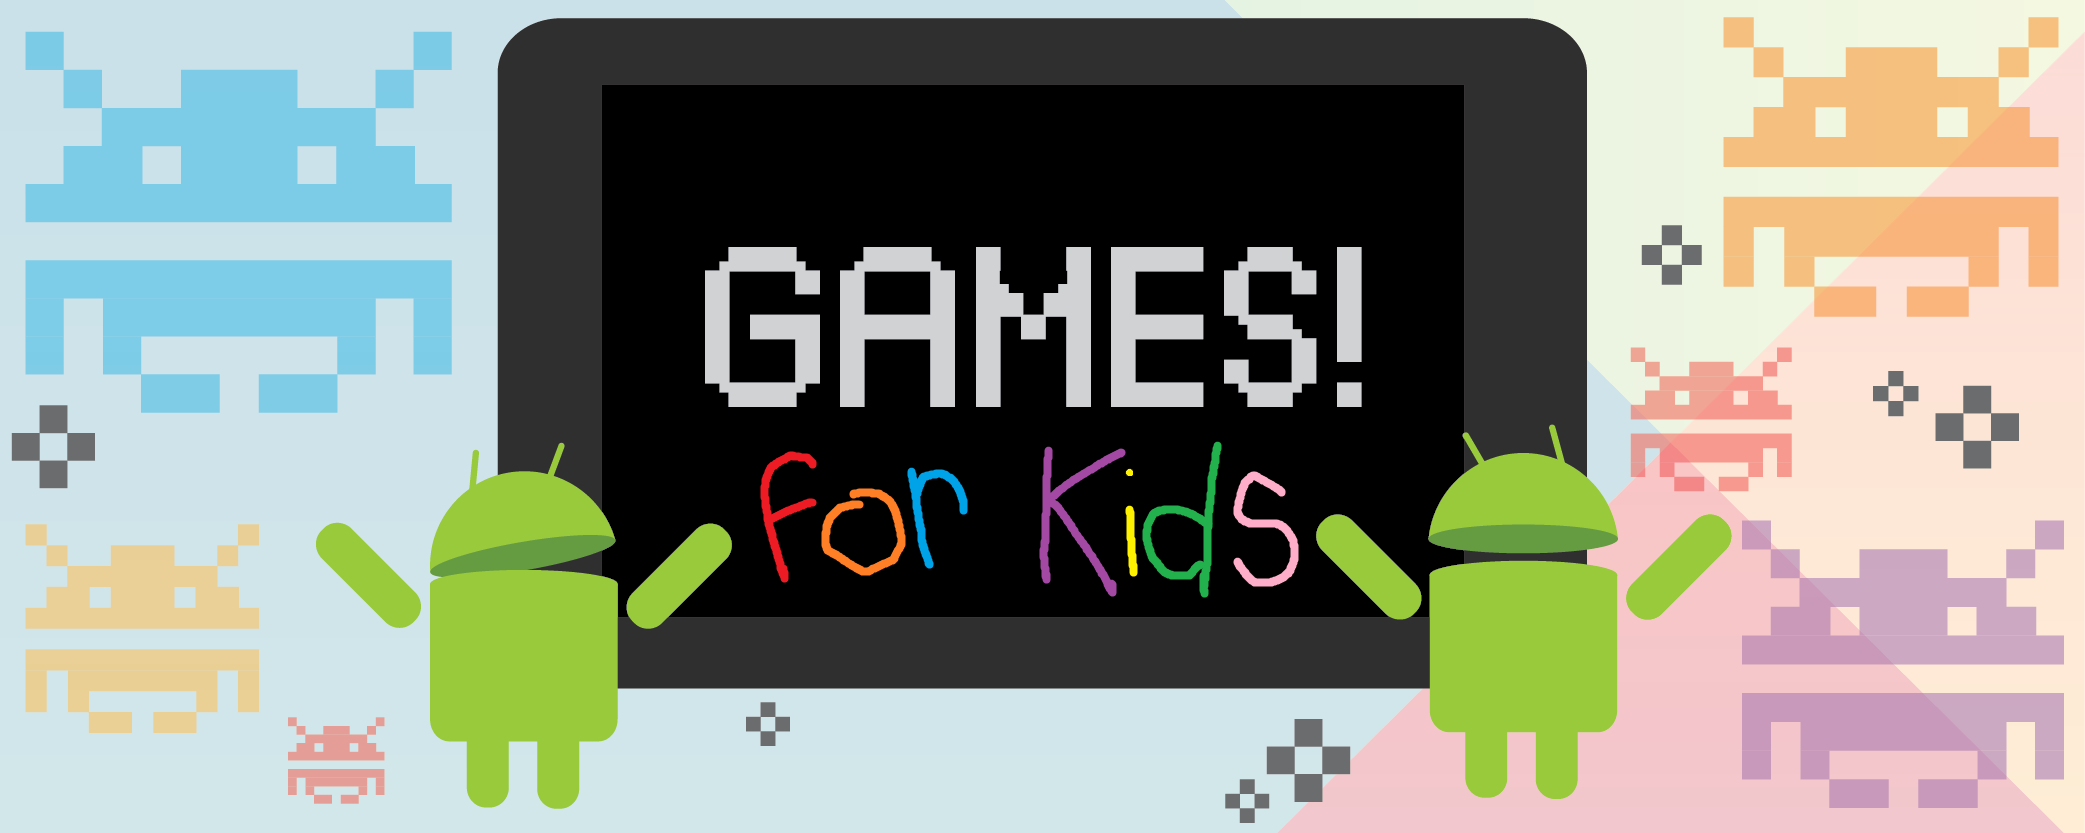 Top 10 Best FREE Mobile Games for Kids 